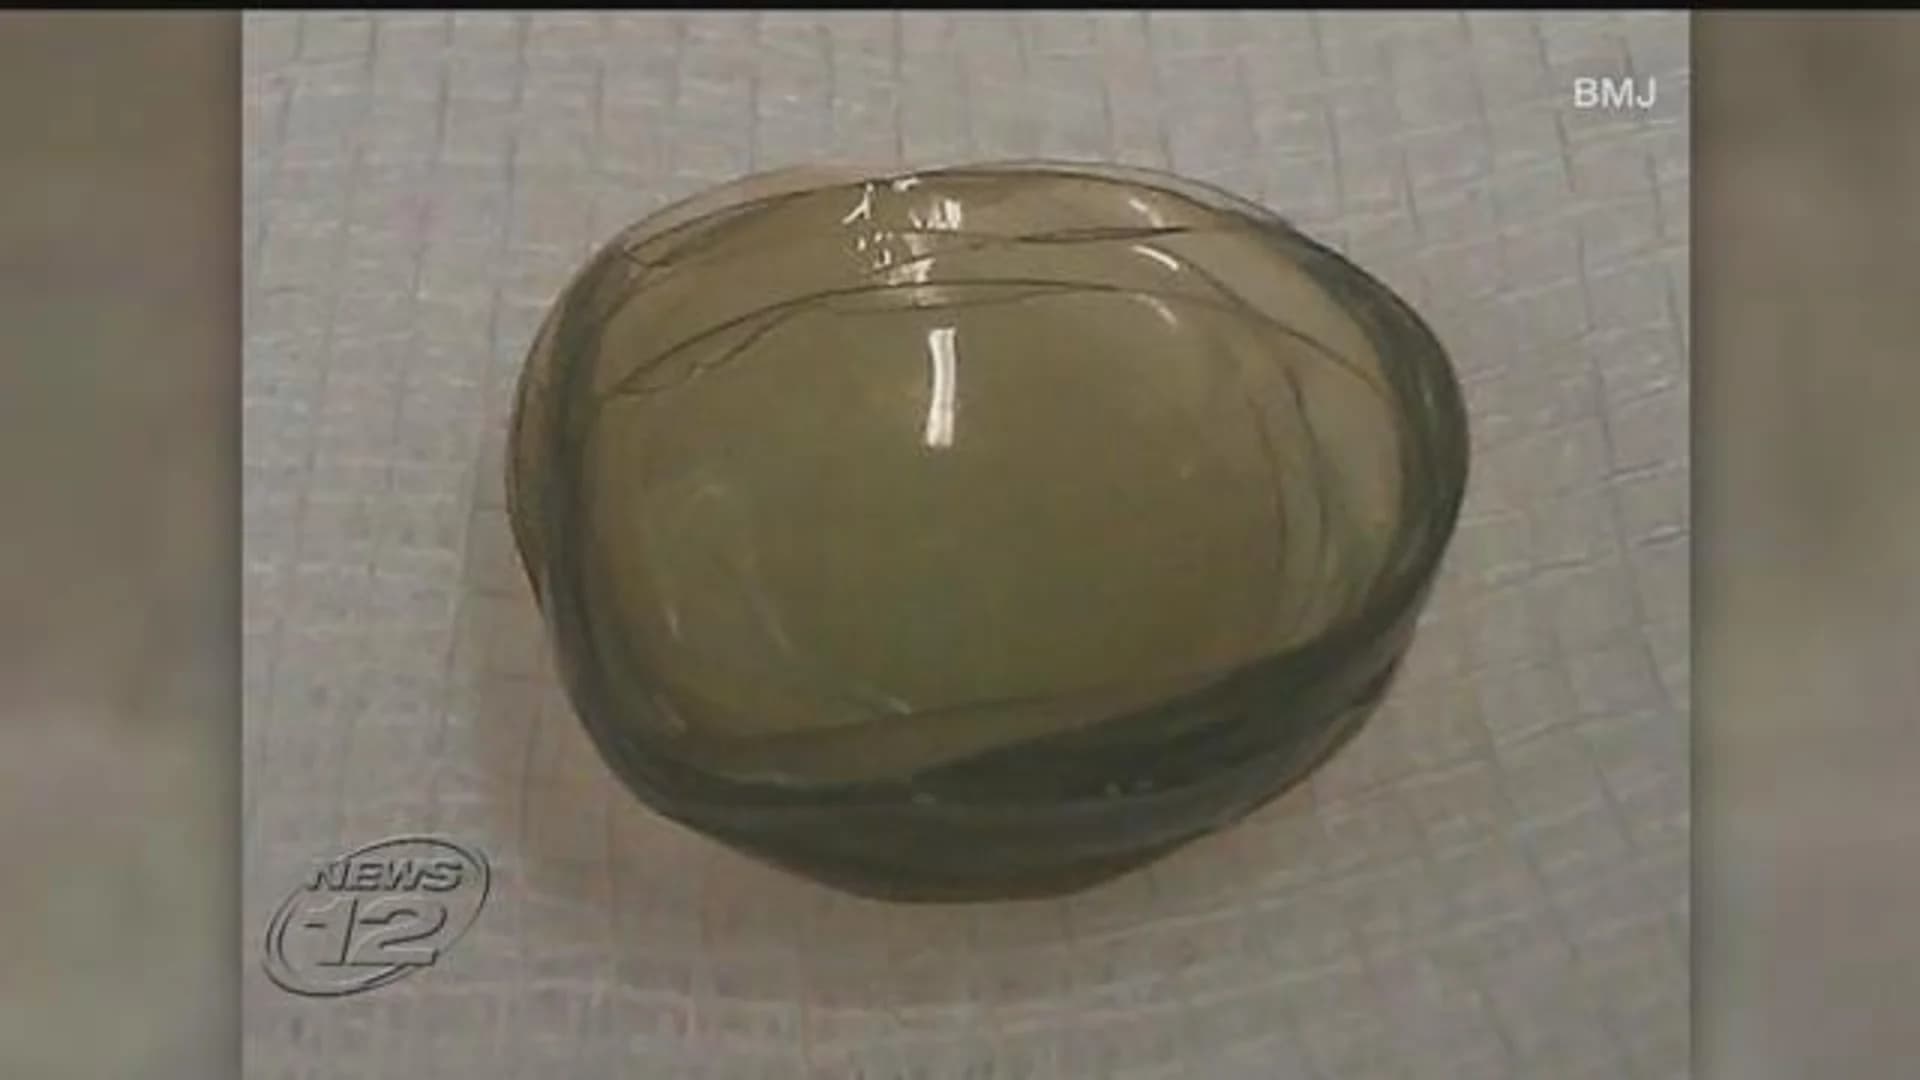 See this? Doctors find 27 contact lenses in woman's eye